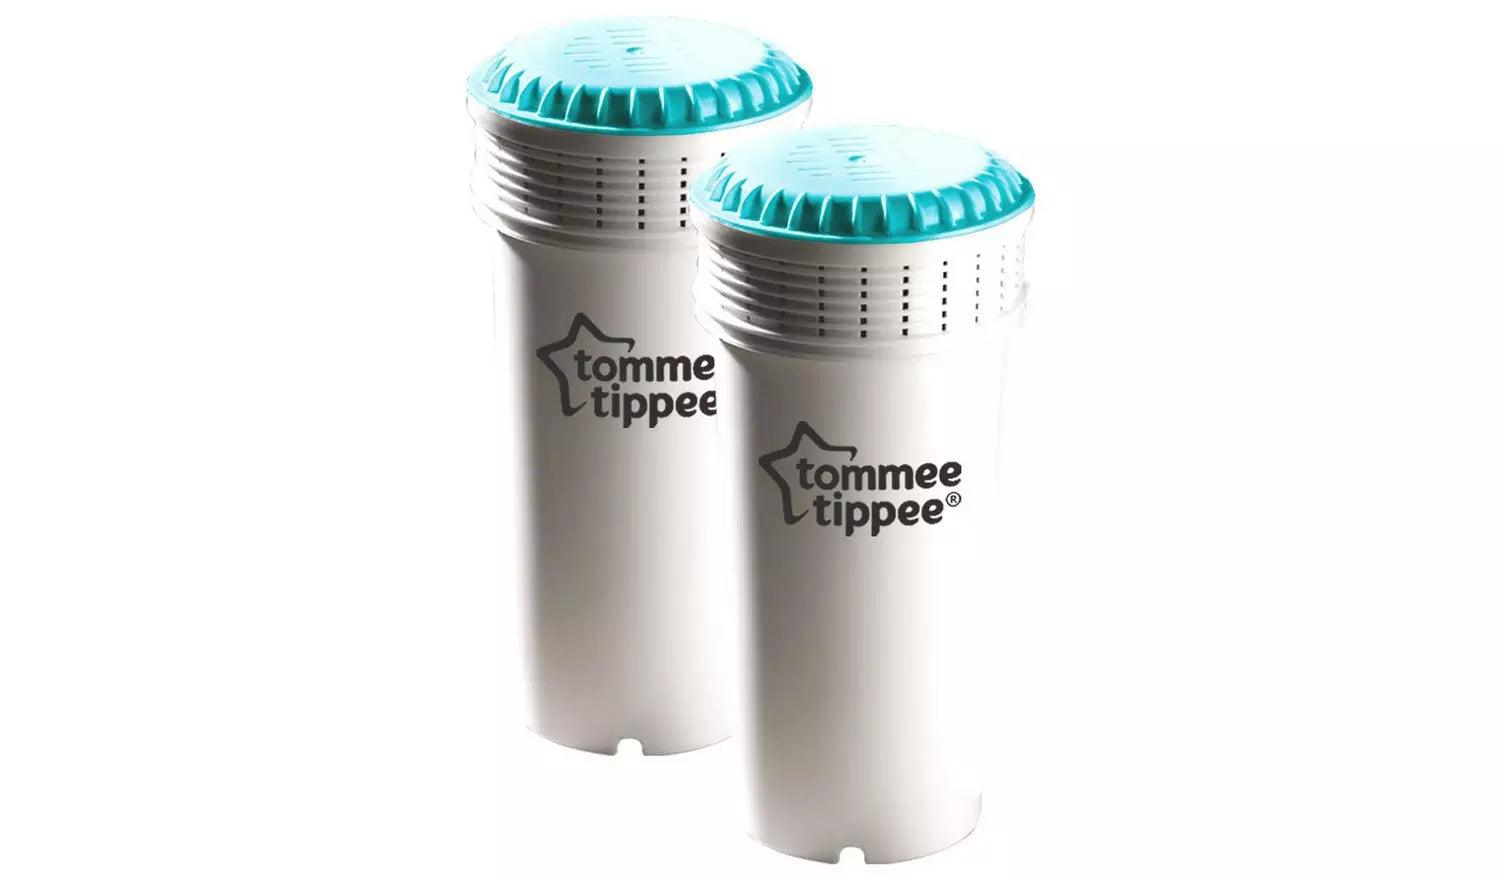 Tommee Tippee - Tommee Tippee 2x Replacement Water Filters for Perfect Prep Machine Closer To Nature - Mari Kali Stores Cyprus